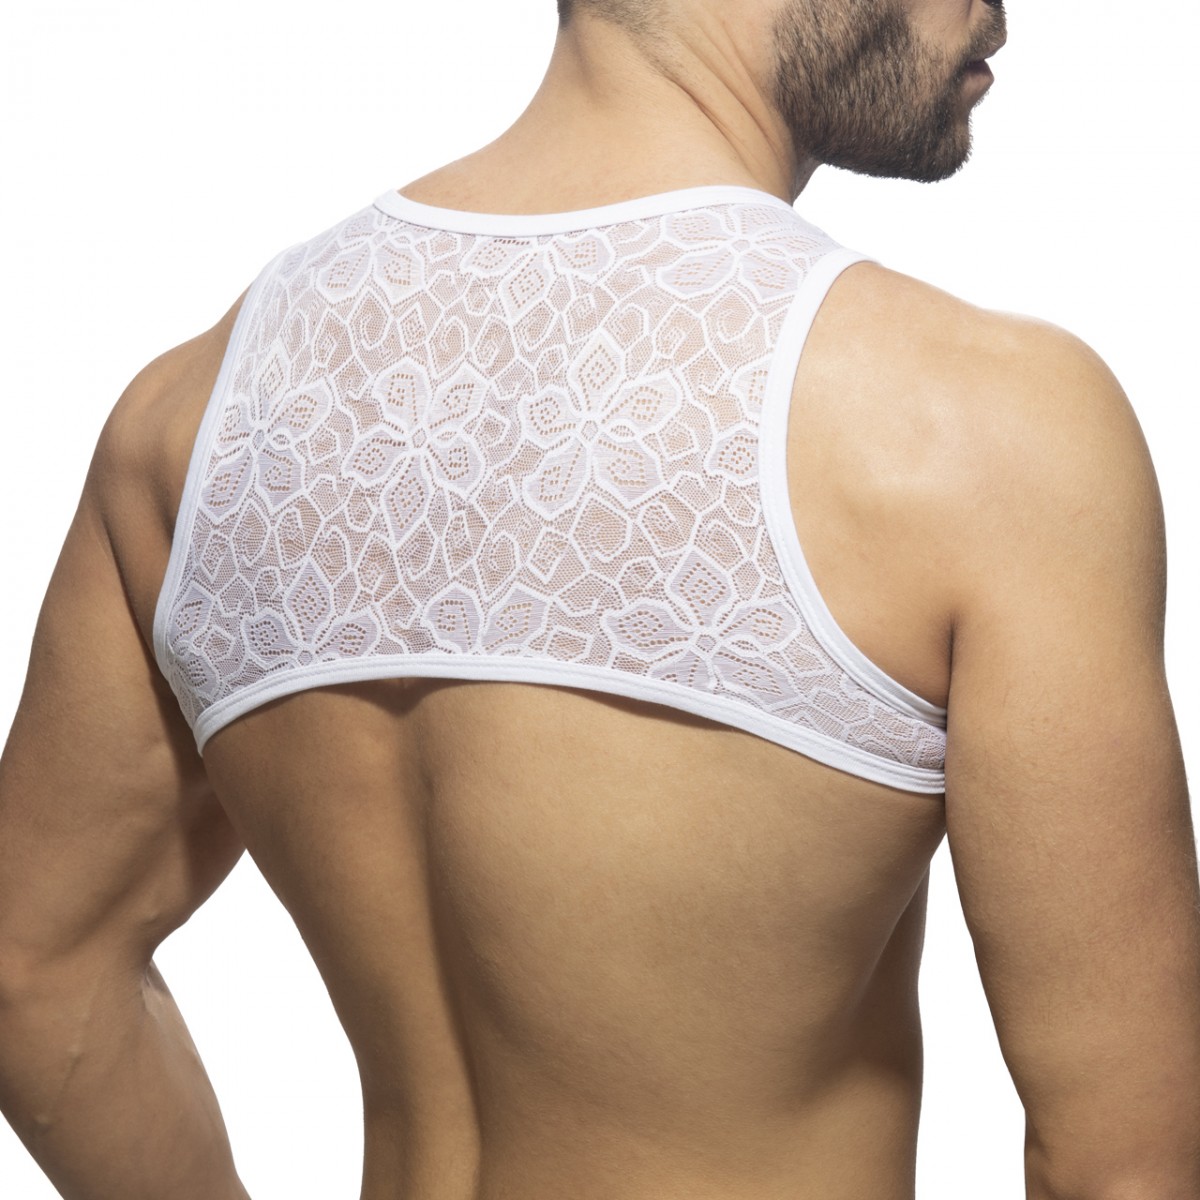 Addicted Flowery Lace Harness white